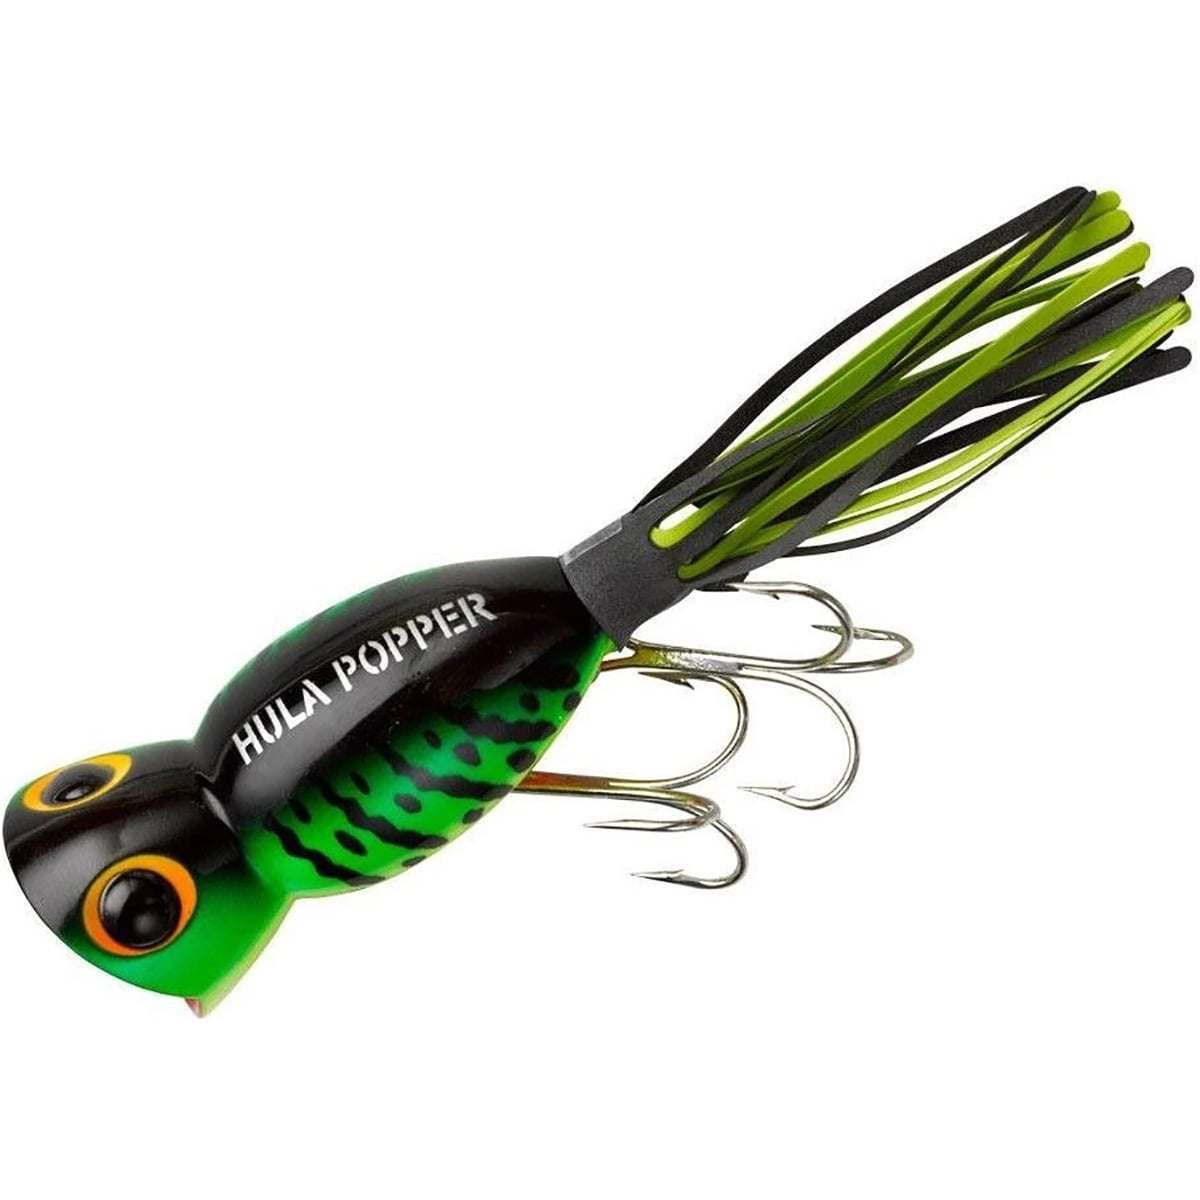 Arbogast Hula Popper 5/8 oz Fishing Lure - White/Red Head 